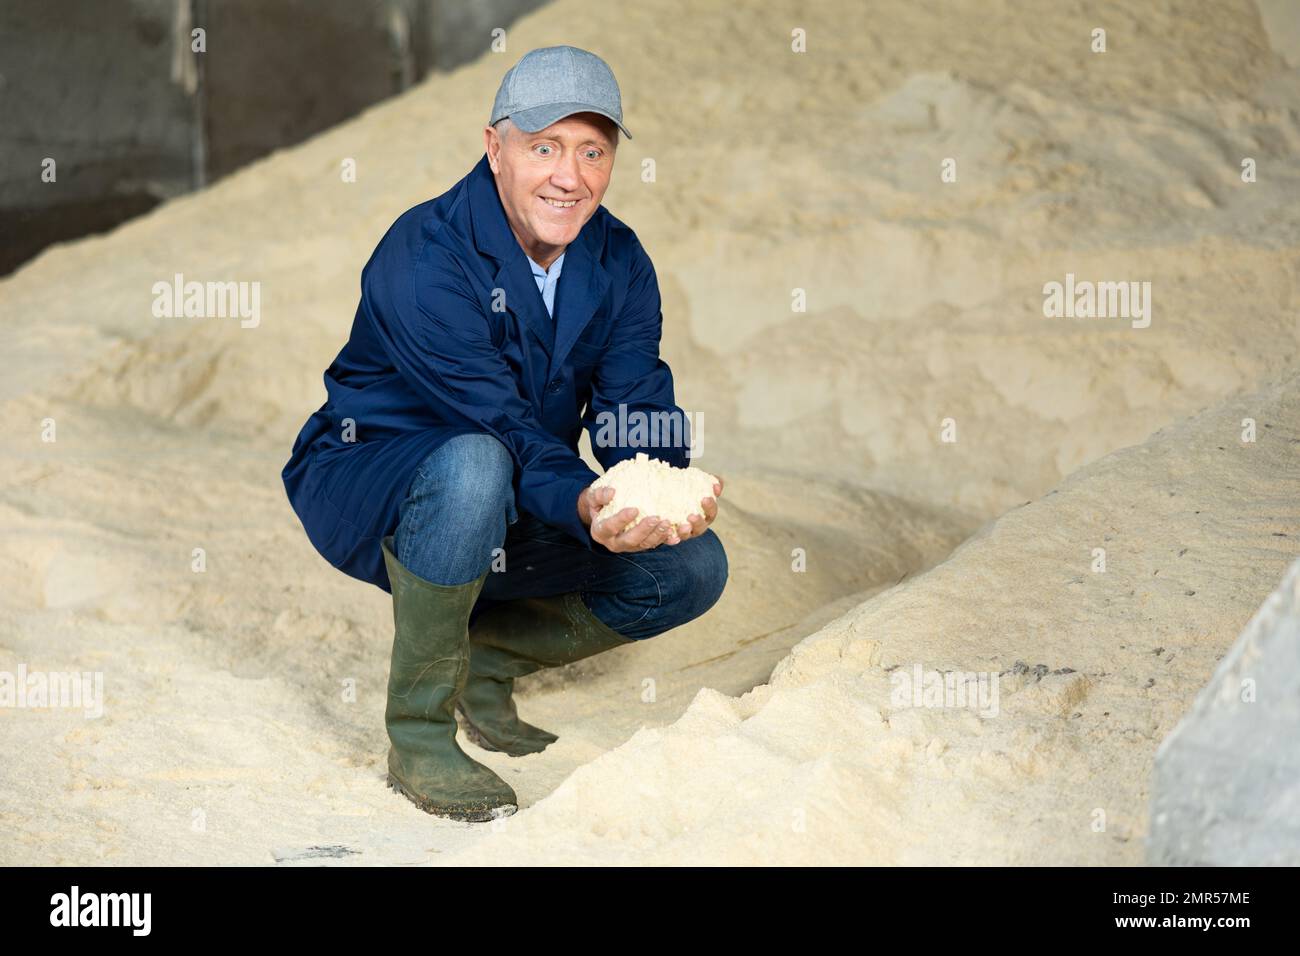 Happy dairy farm male worker holding corn flour animal feed for dairy cattle in farm storage area Stock Photo